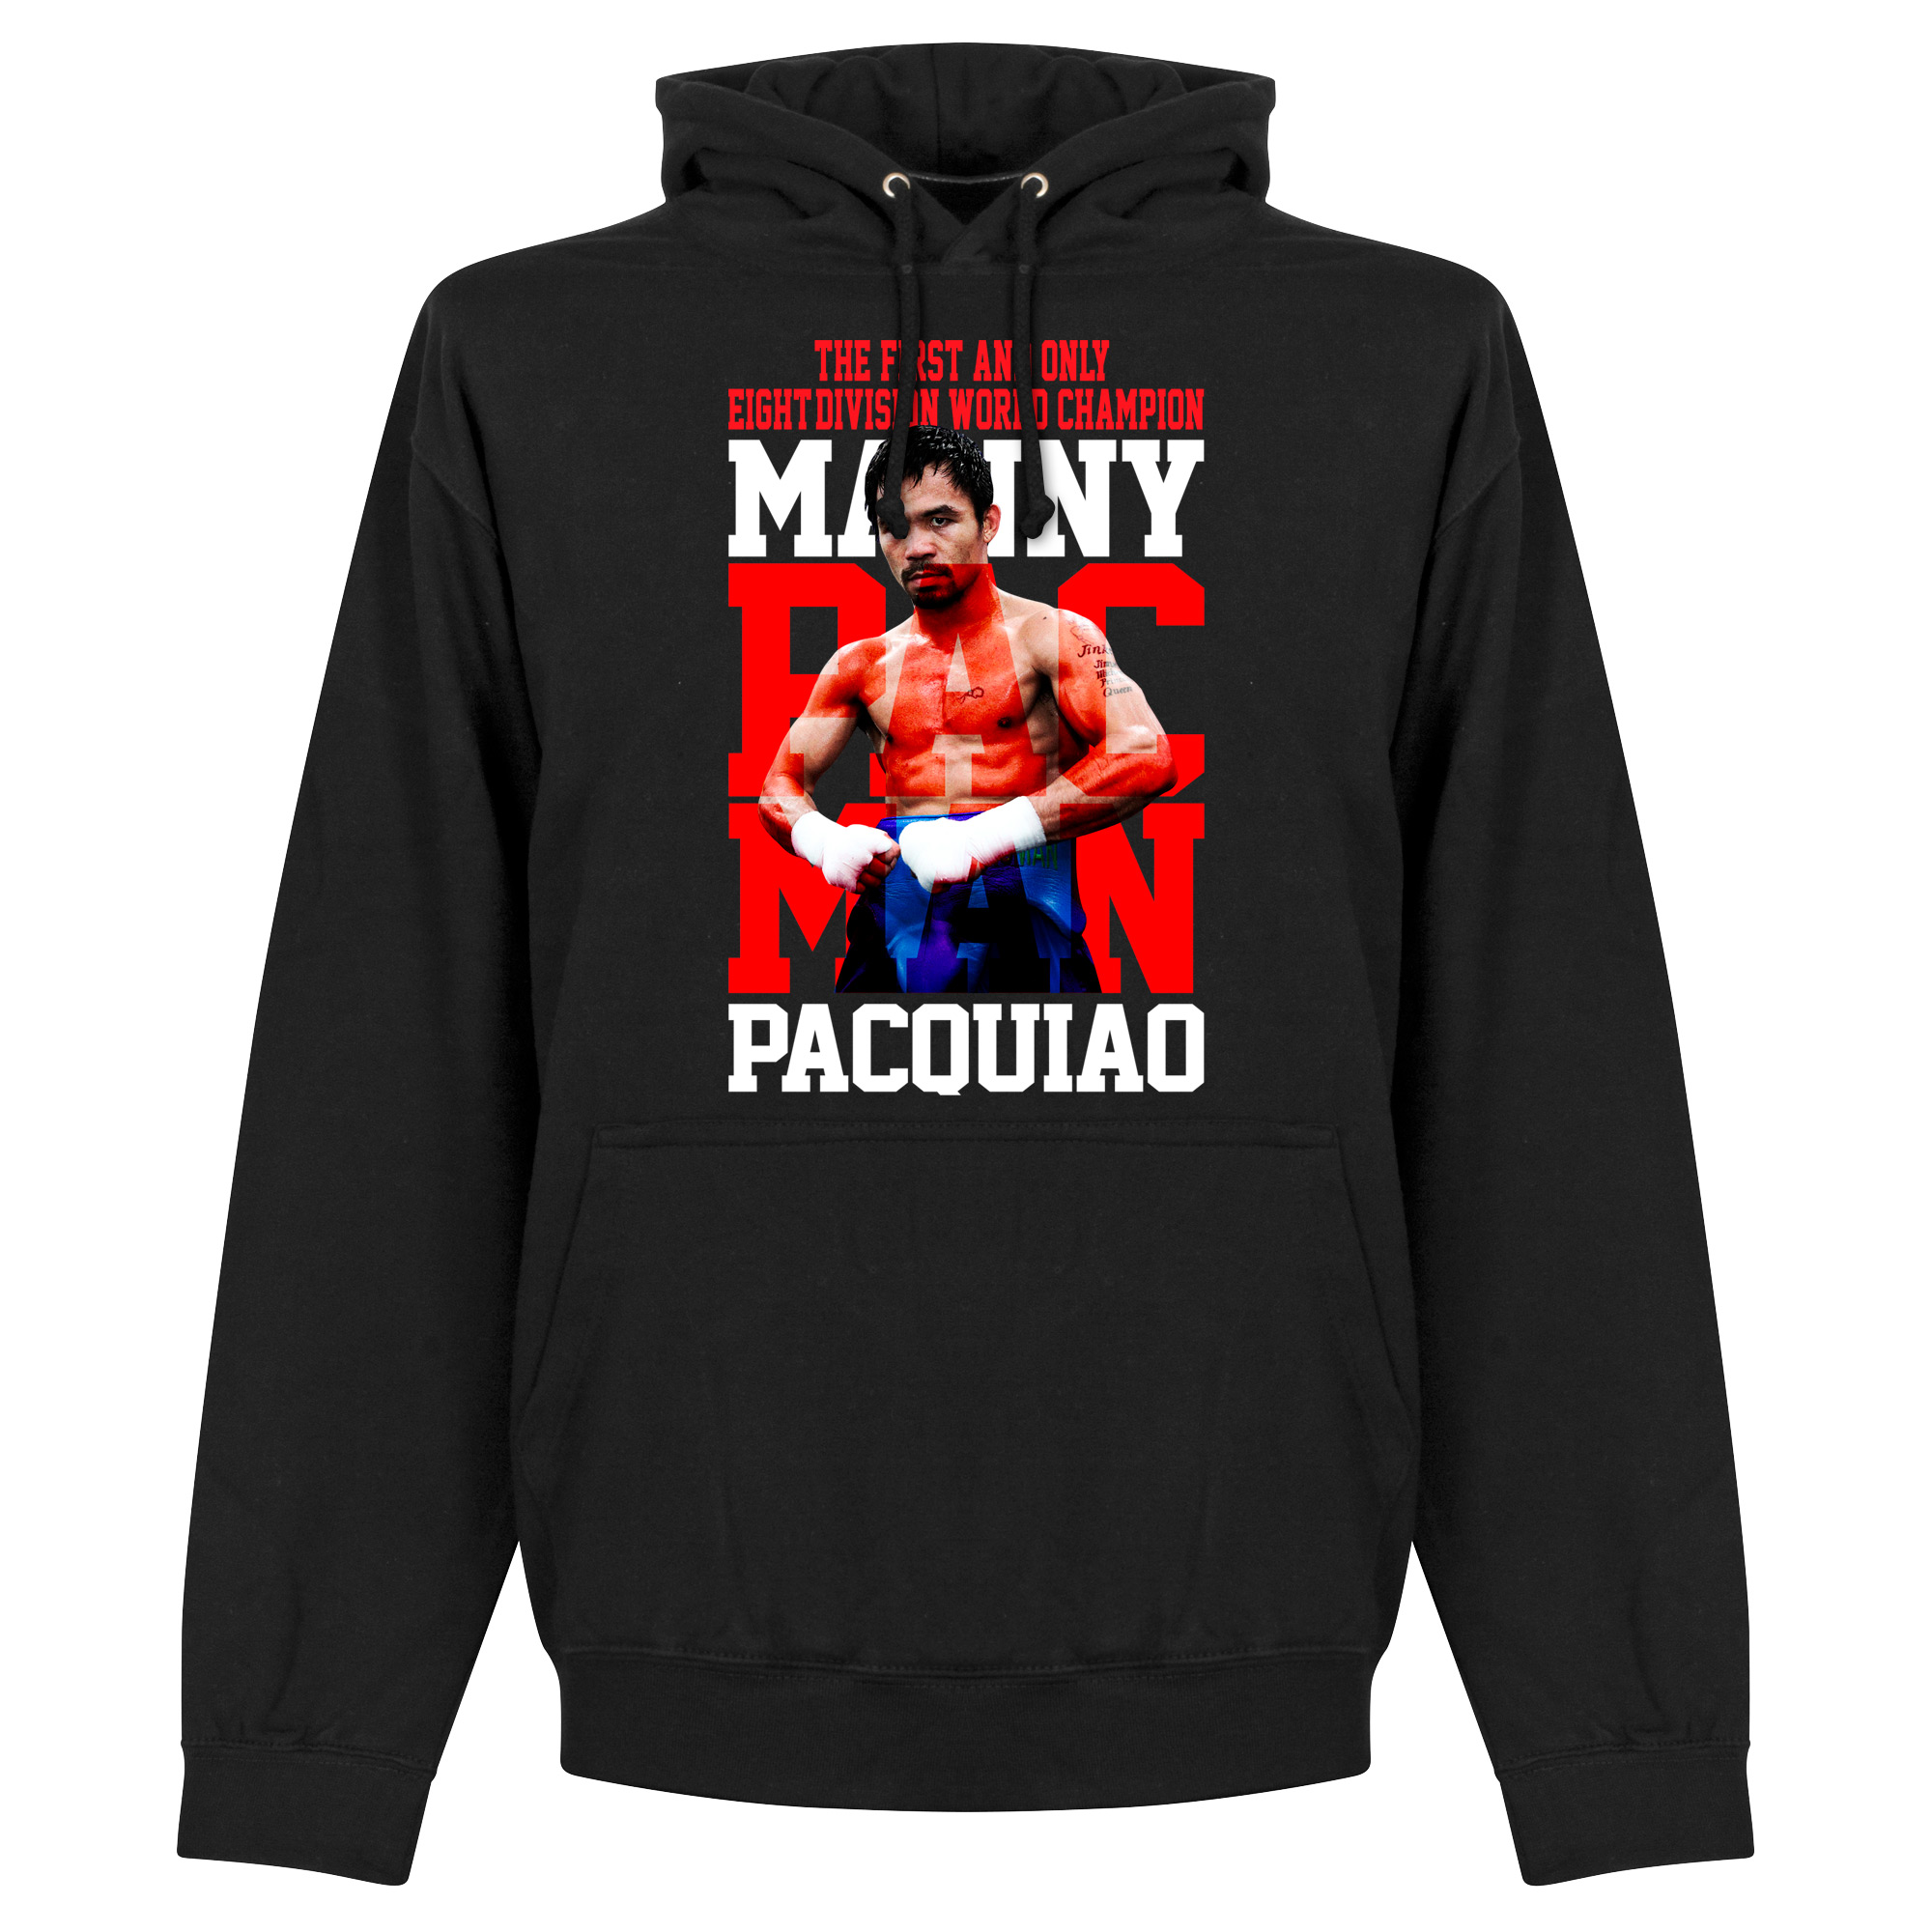 Manny Pacquiao Legend Hooded Sweater M